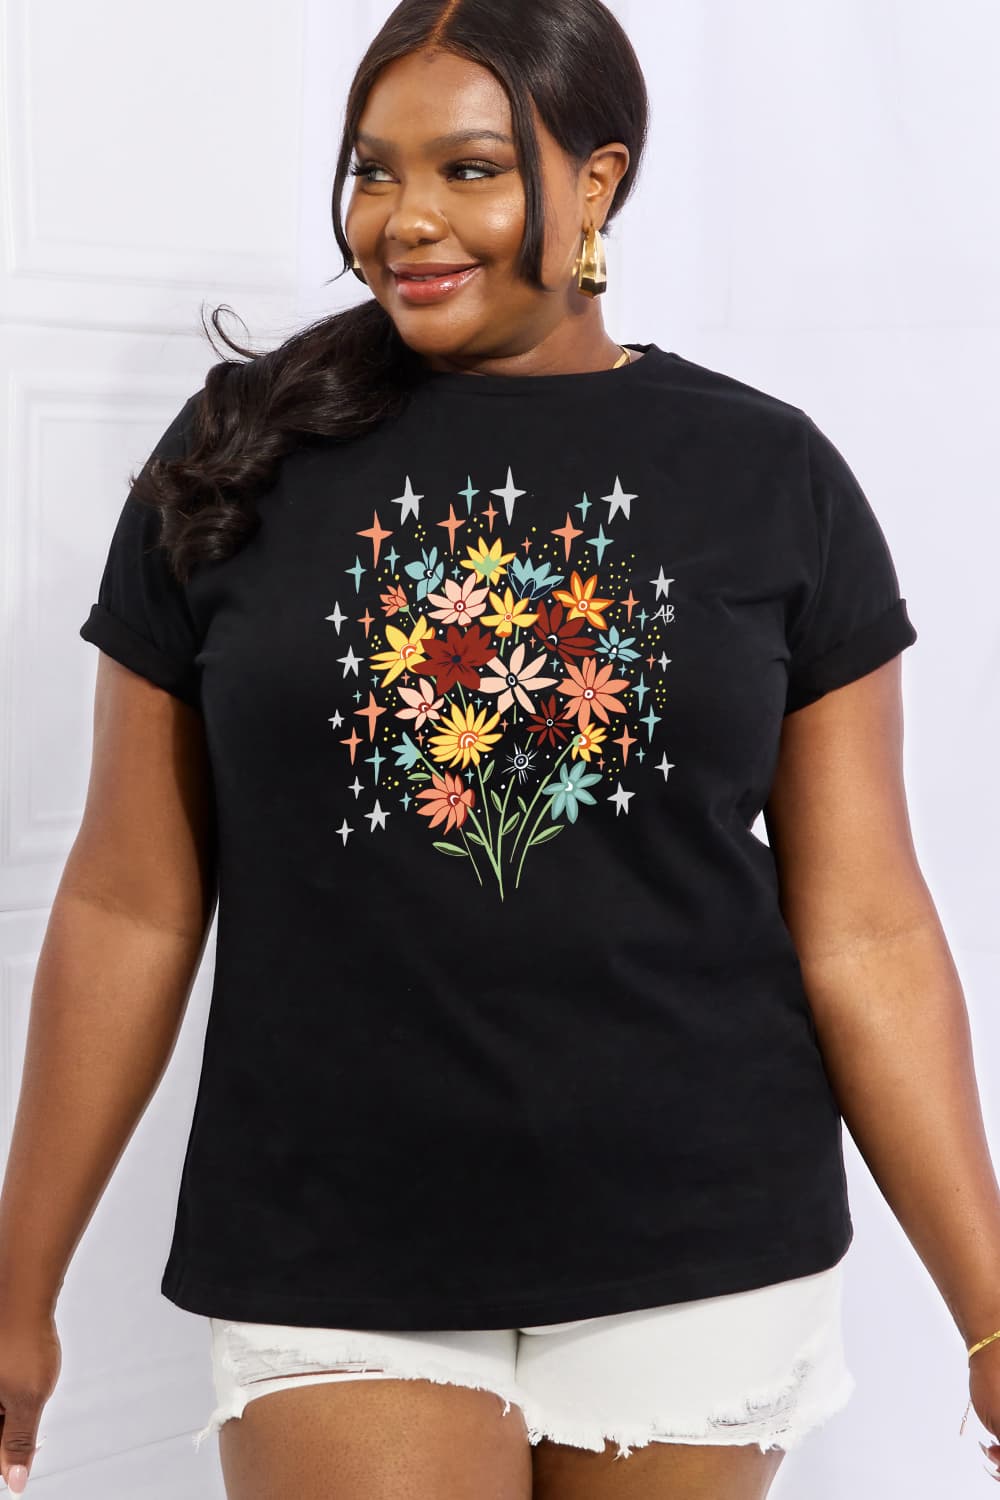 Simply Love - Floral Graphic Tee